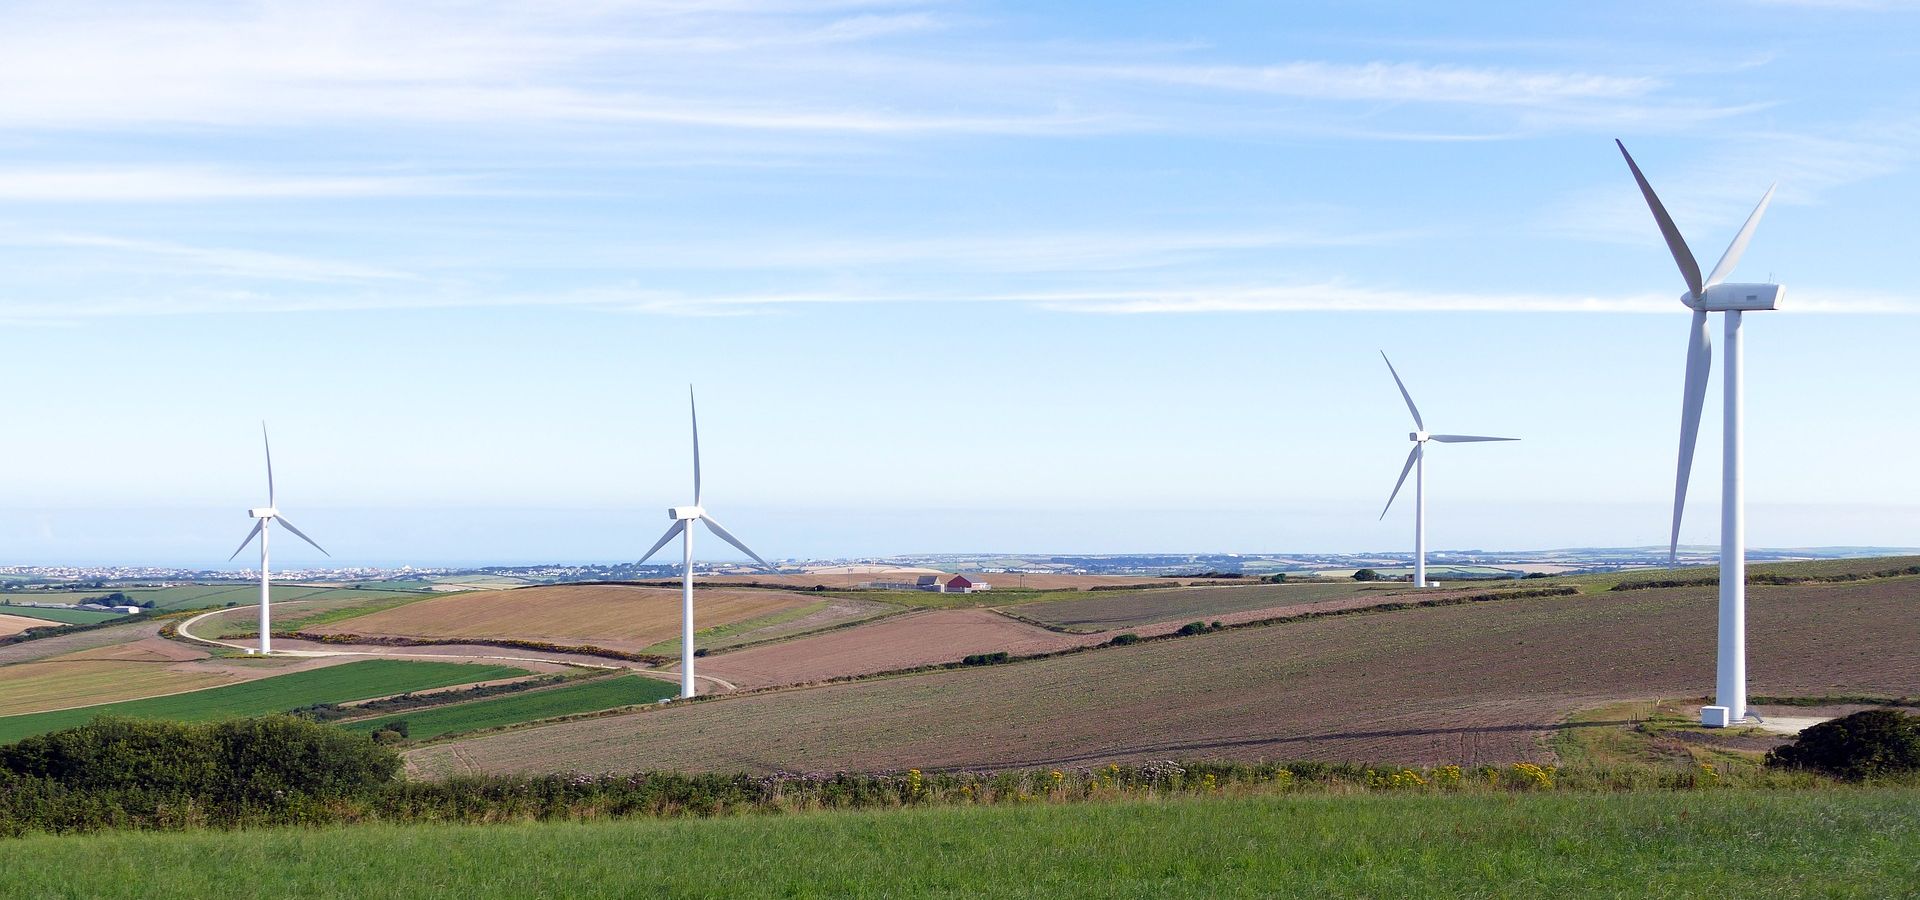 Polish politicians need to take action to change the wind turbine laws to ensure the renewable energy industry